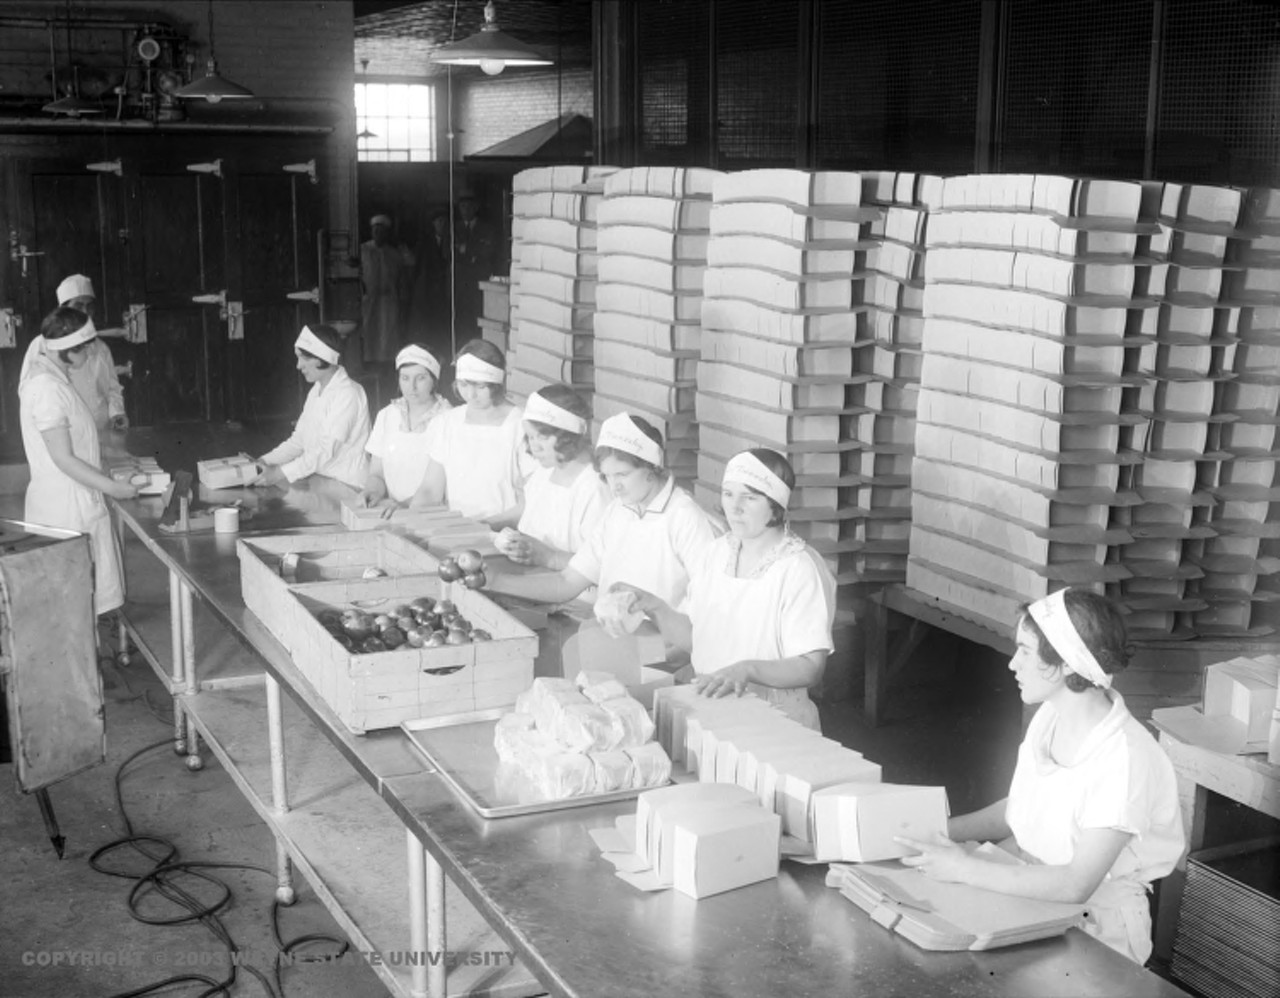 Ford Motor Co. bakery
from Virtual Motor City (Photo credit: Detroit News Collection, Walter P. Reuther Library, Wayne State University)